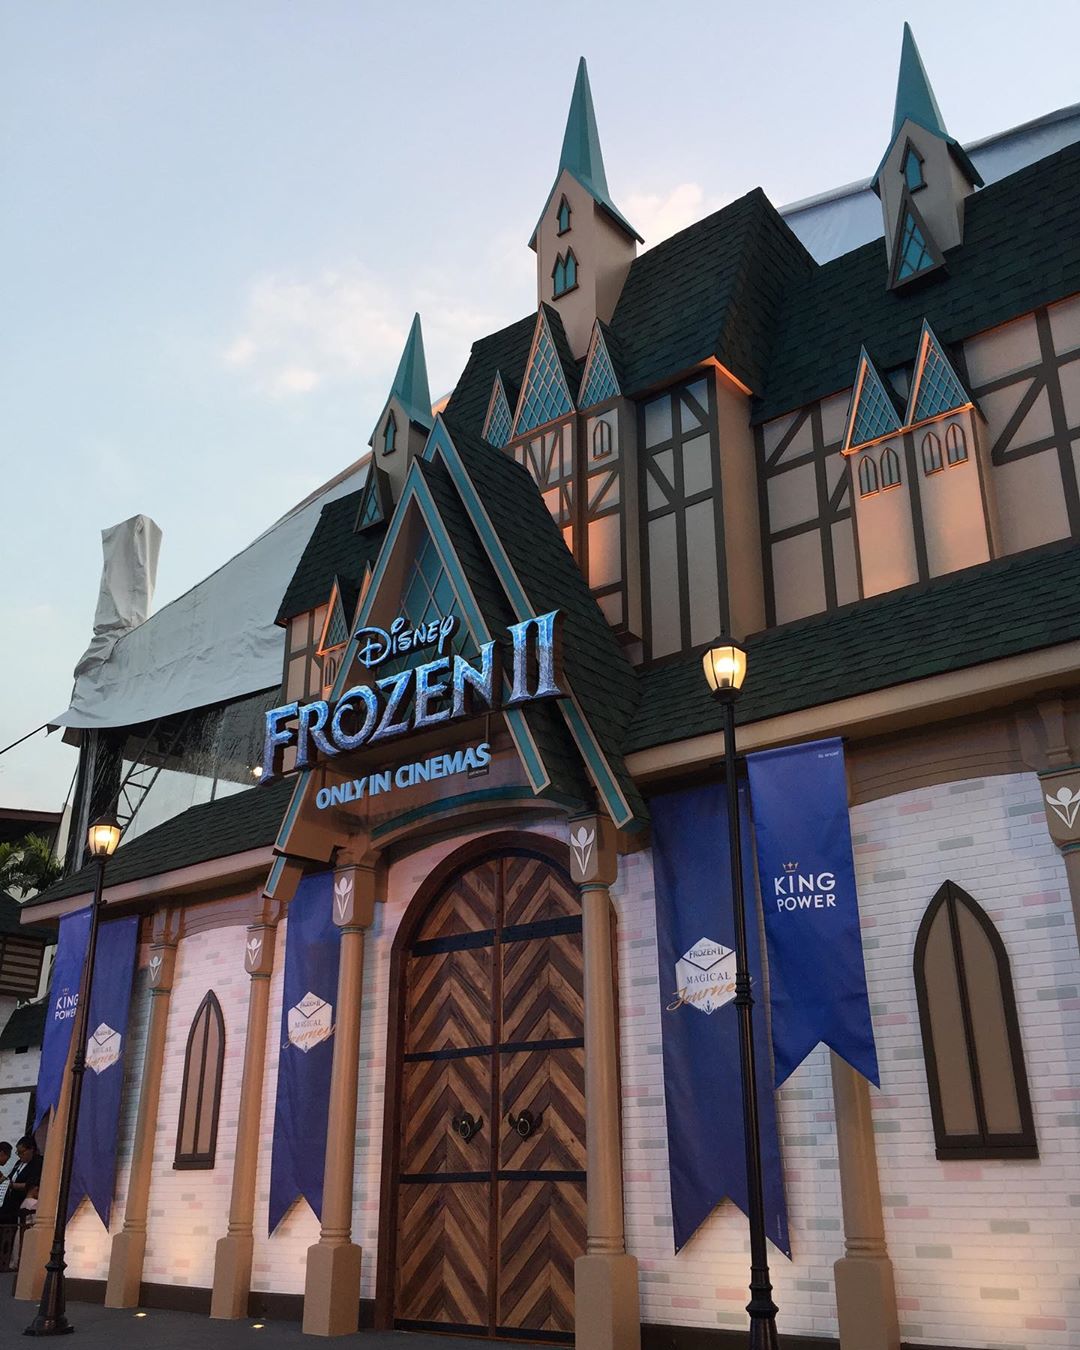 Bangkok Has A Free Frozen 2 Theme Park With Enchanted Photo Zones And Exclusive Disney Collectibles 